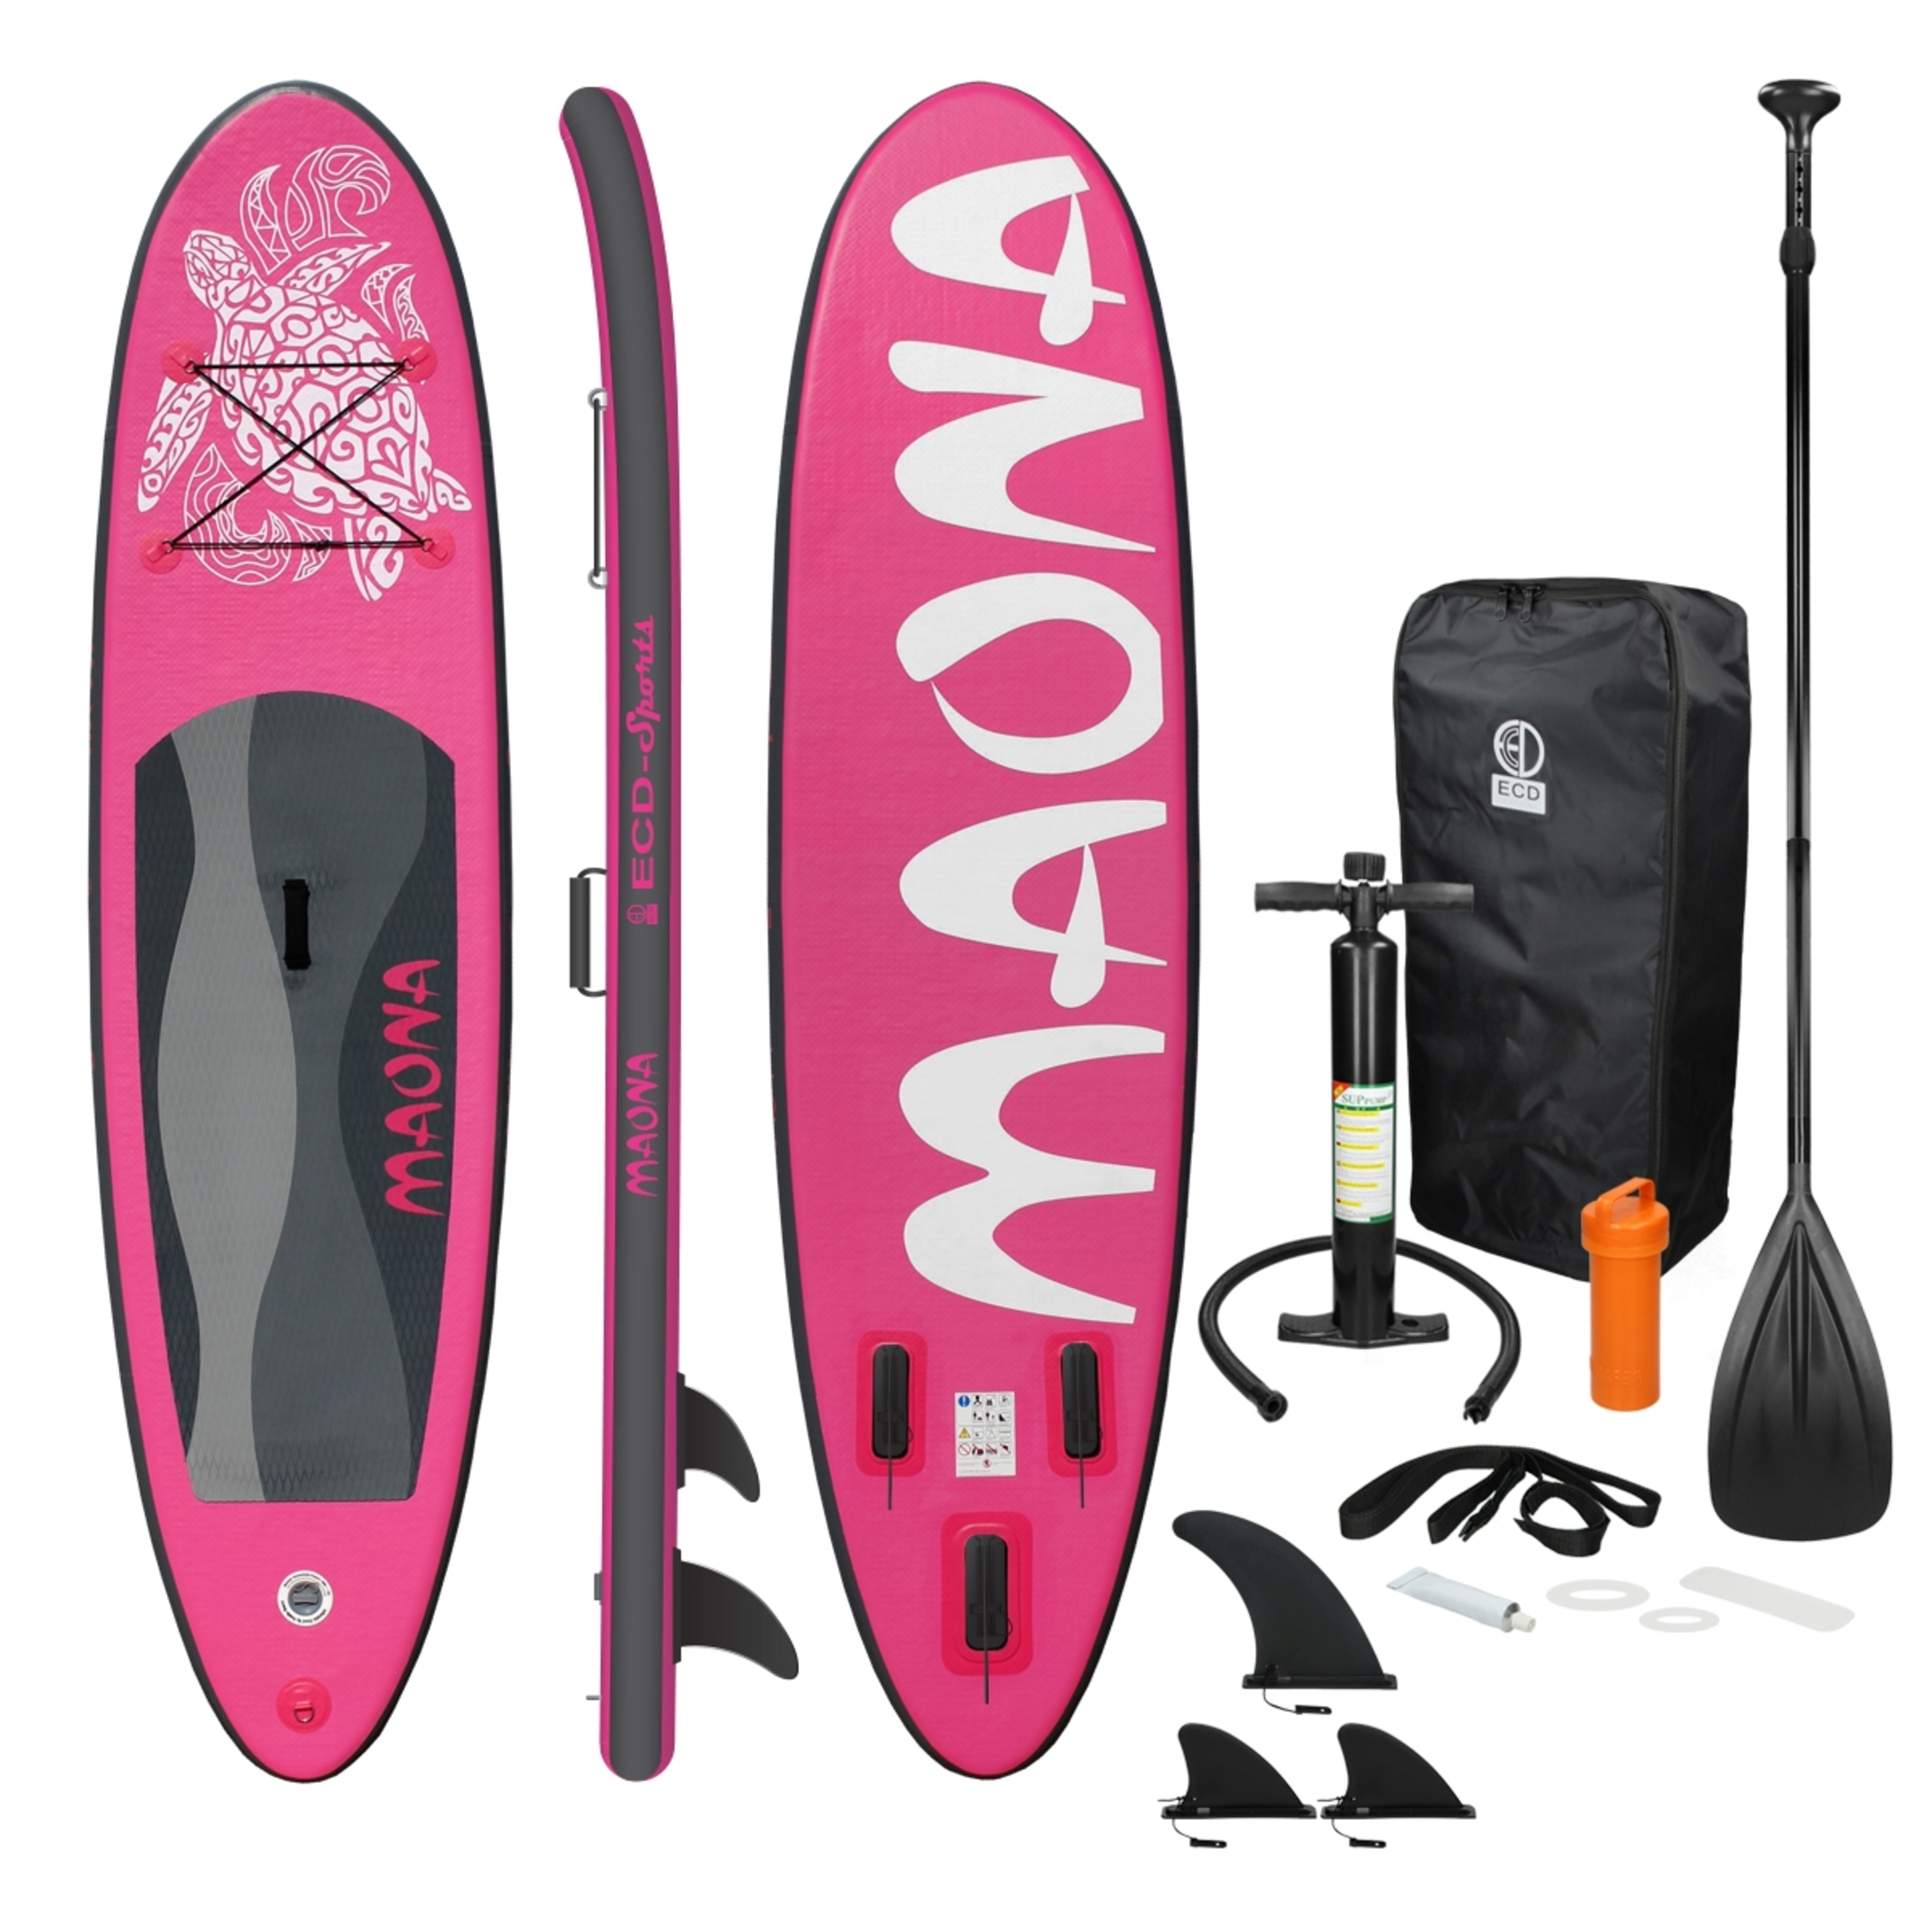 Tabla De Stand Up Paddle Inflable Maona 308x78x10 Cm - rosa - 